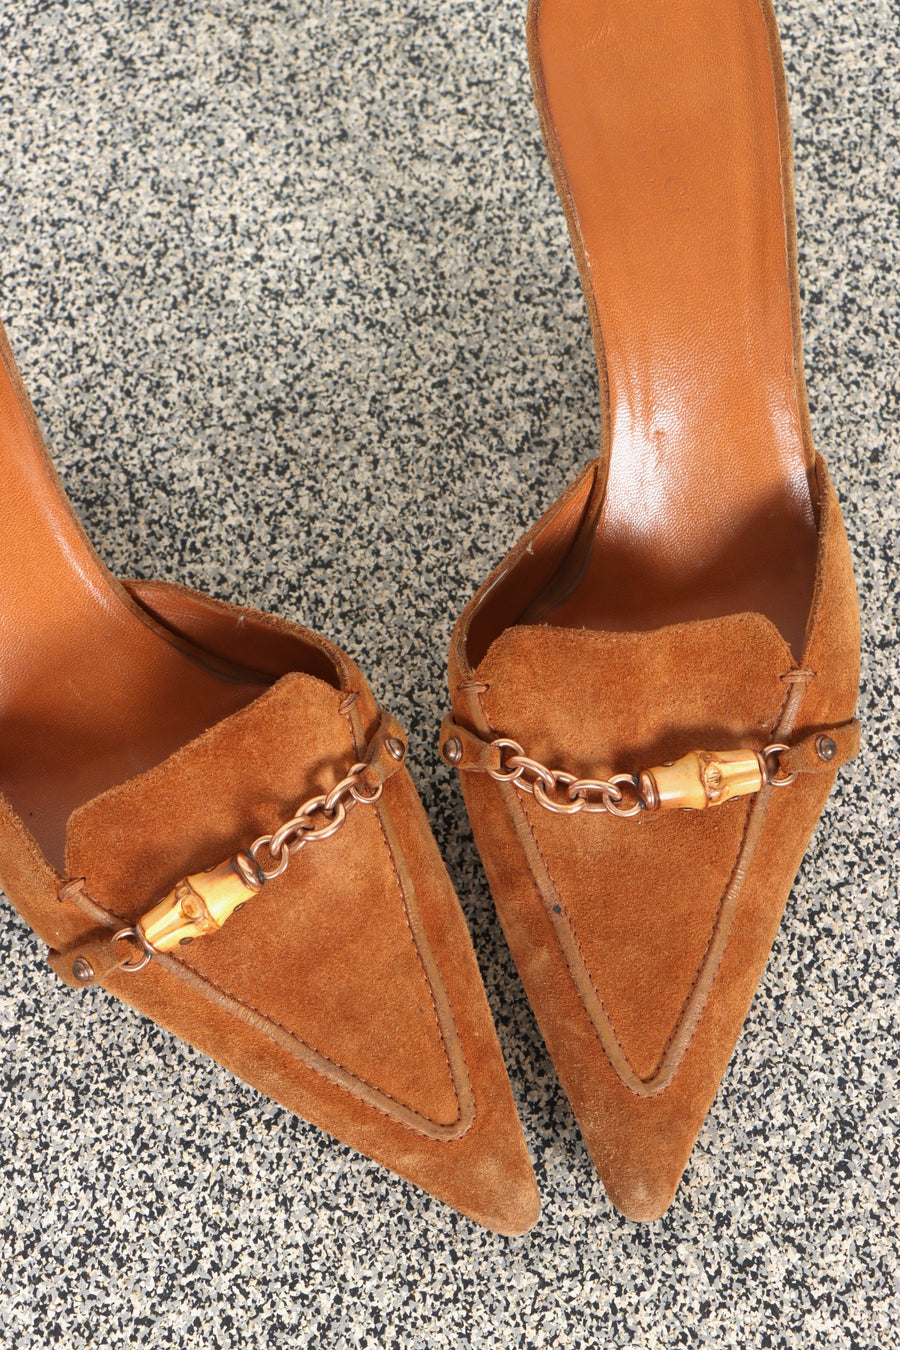 GUCCI Bamboo Detail Brown Suede Pointed Toe Mules (9½B)